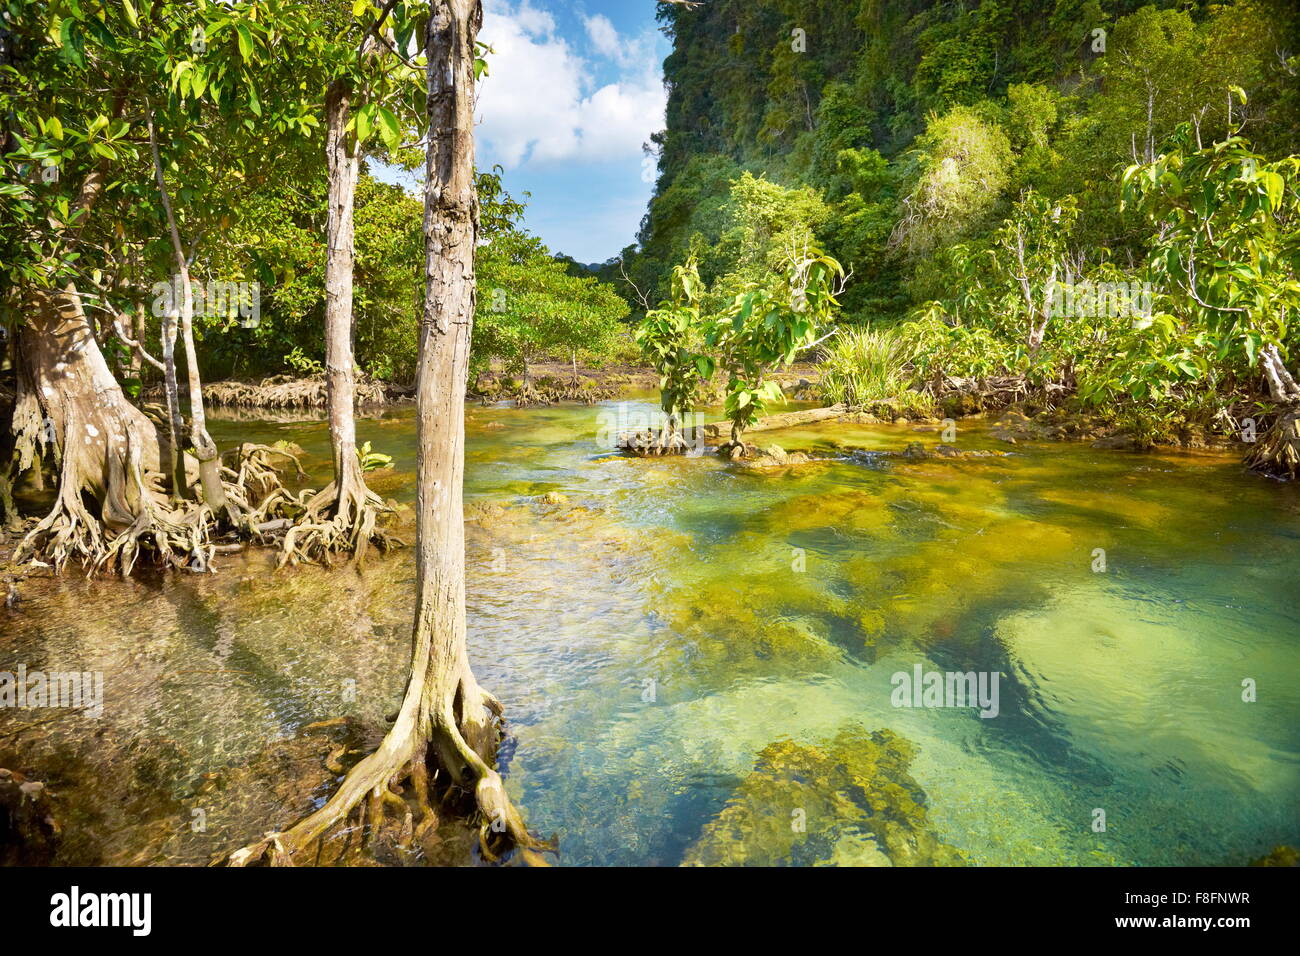 Thailand - mangrove forest in Tha Pom Khlong Song Nam National Park Stock Photo